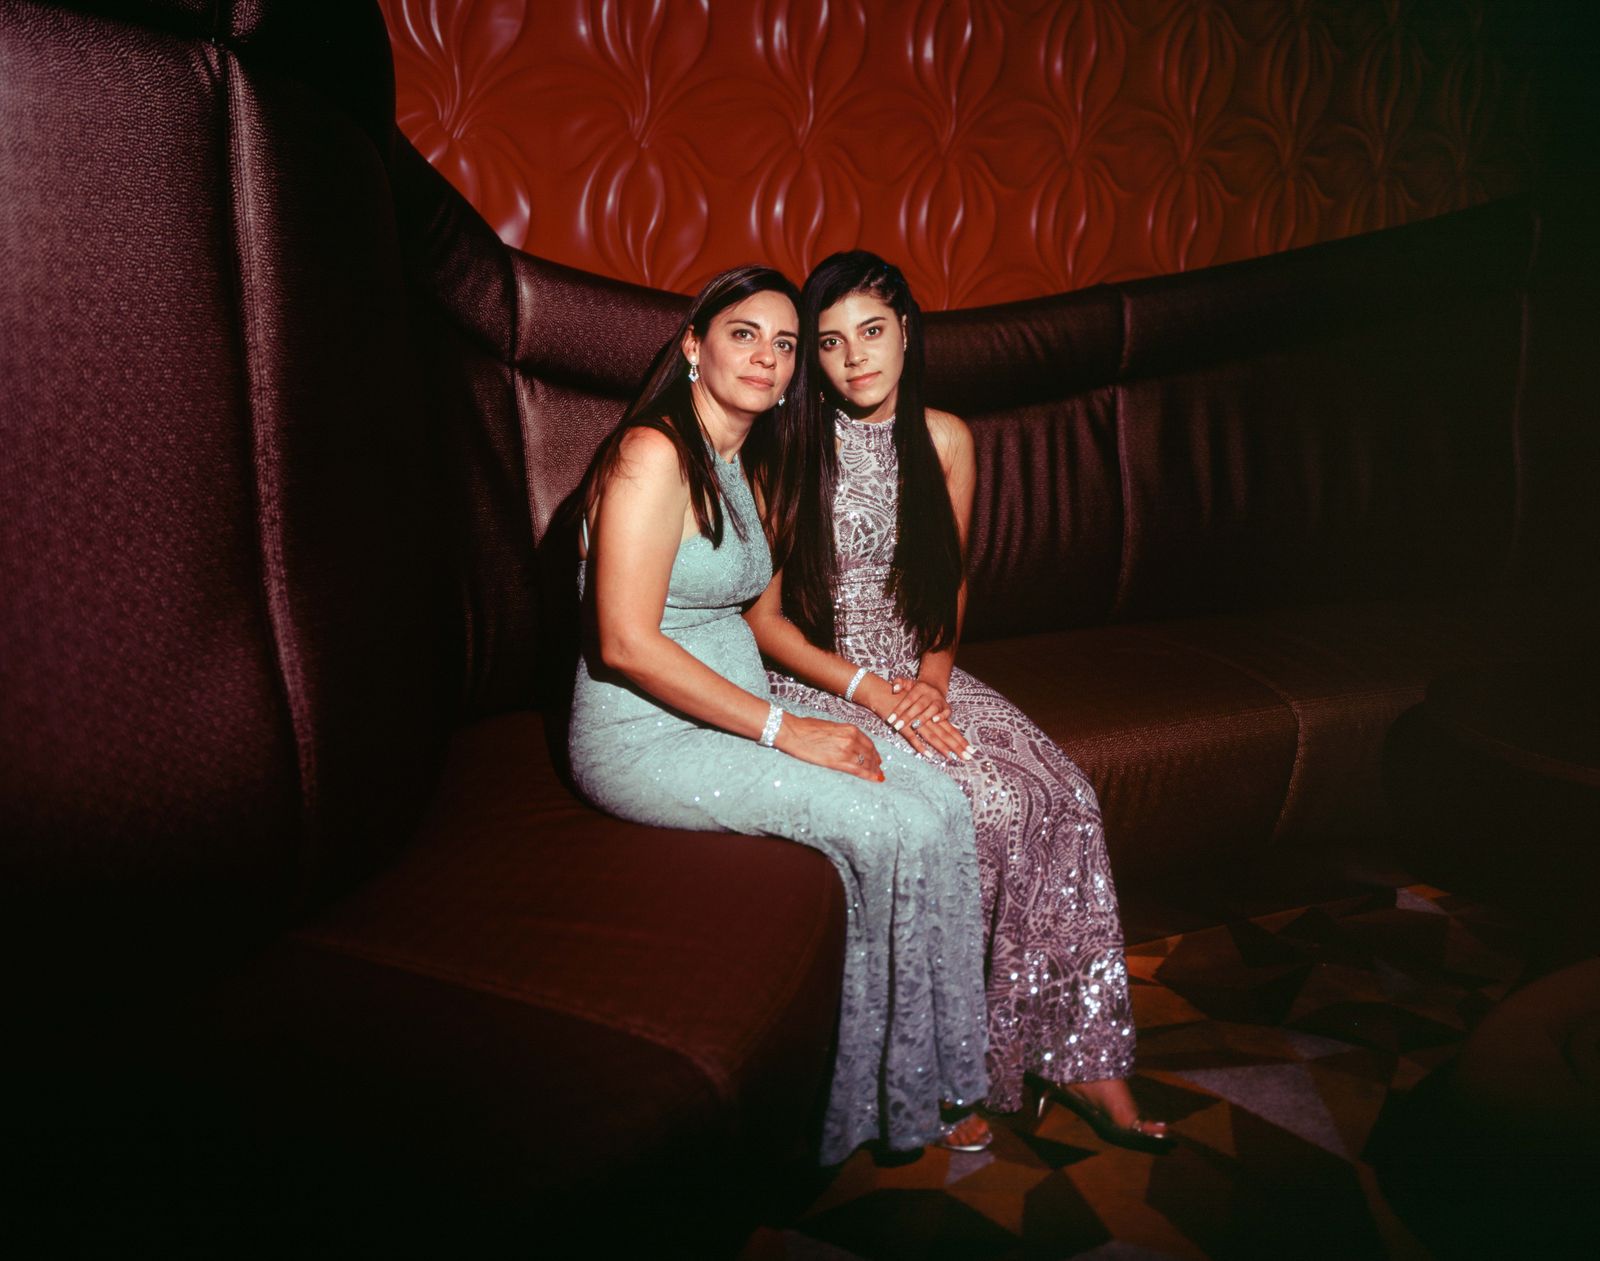 © Samantha Cabrera Friend - Quinceañera Natalie Gonzalez and her mother Liudmila Sarmiento pose before the dinner, the day after their celebration.